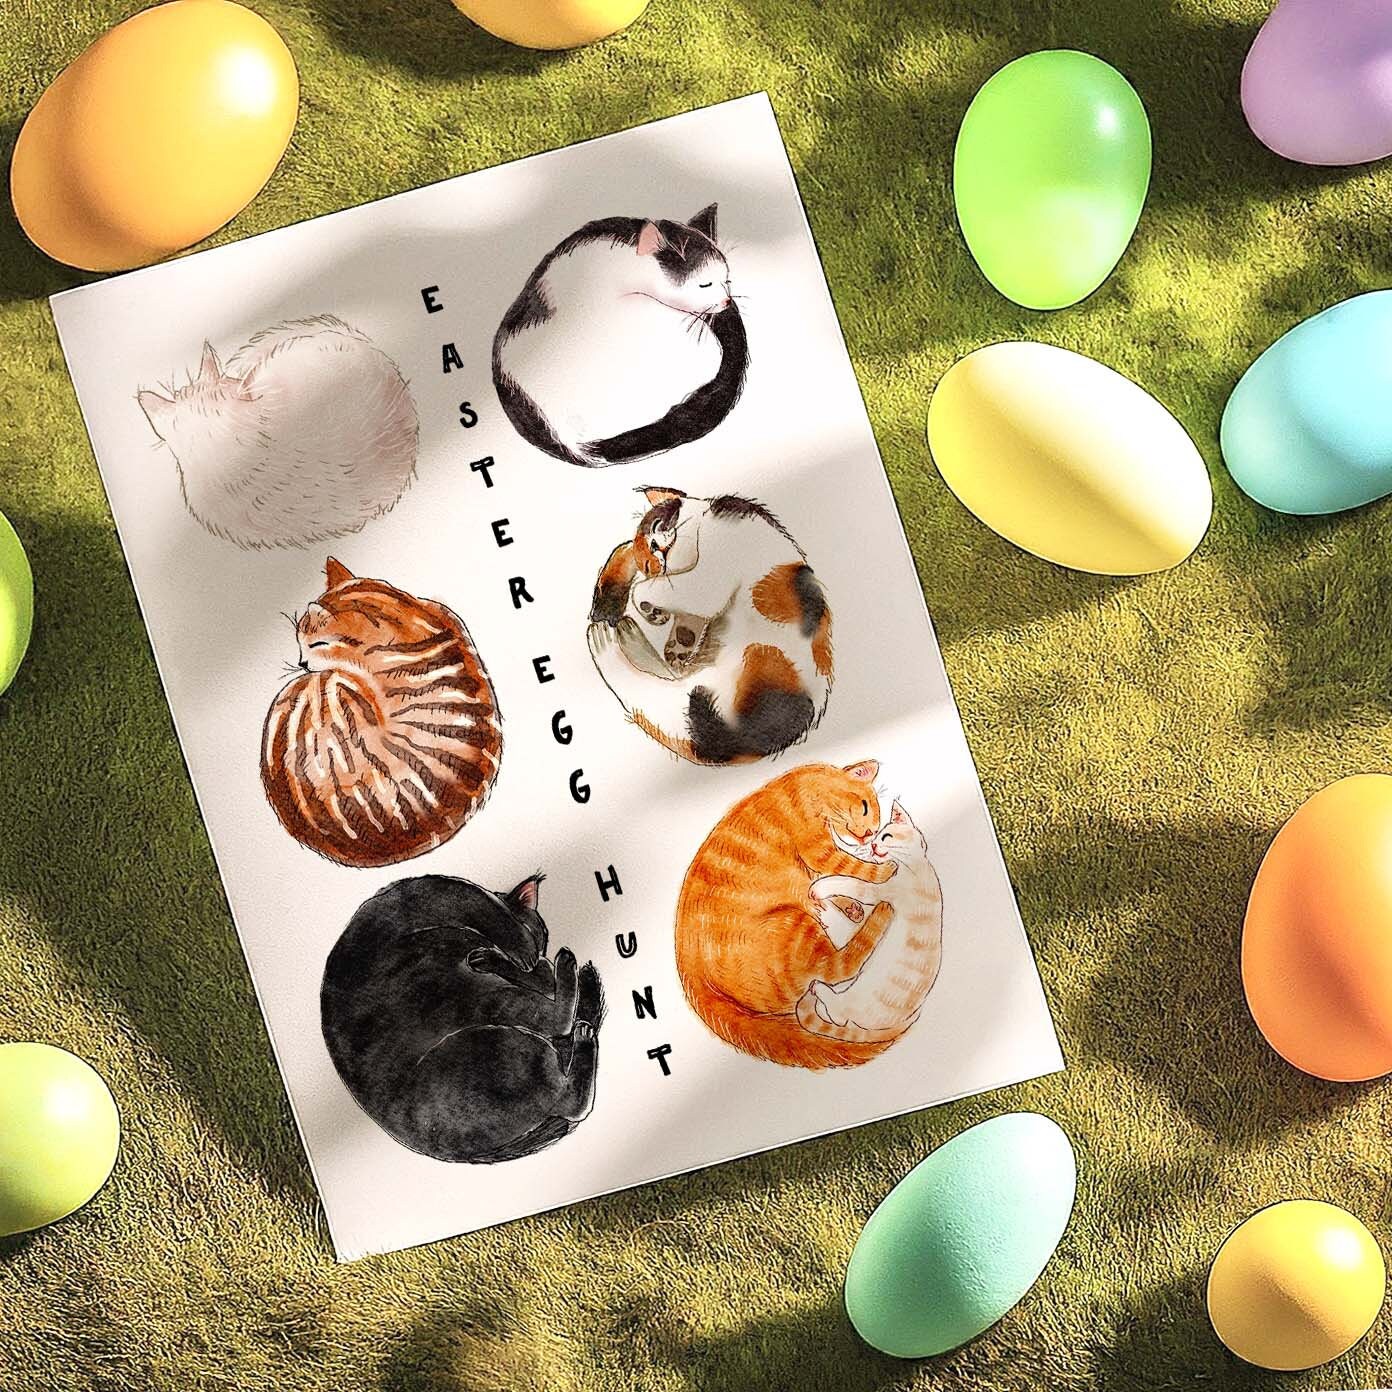 Easter Egg Hunt card featuring six cats curled up like eggs: white cat, black cat, tuxedo cat, brown tabby cat, calico cat, and an orange cat mom with her kitten. Perfect for cat lovers!